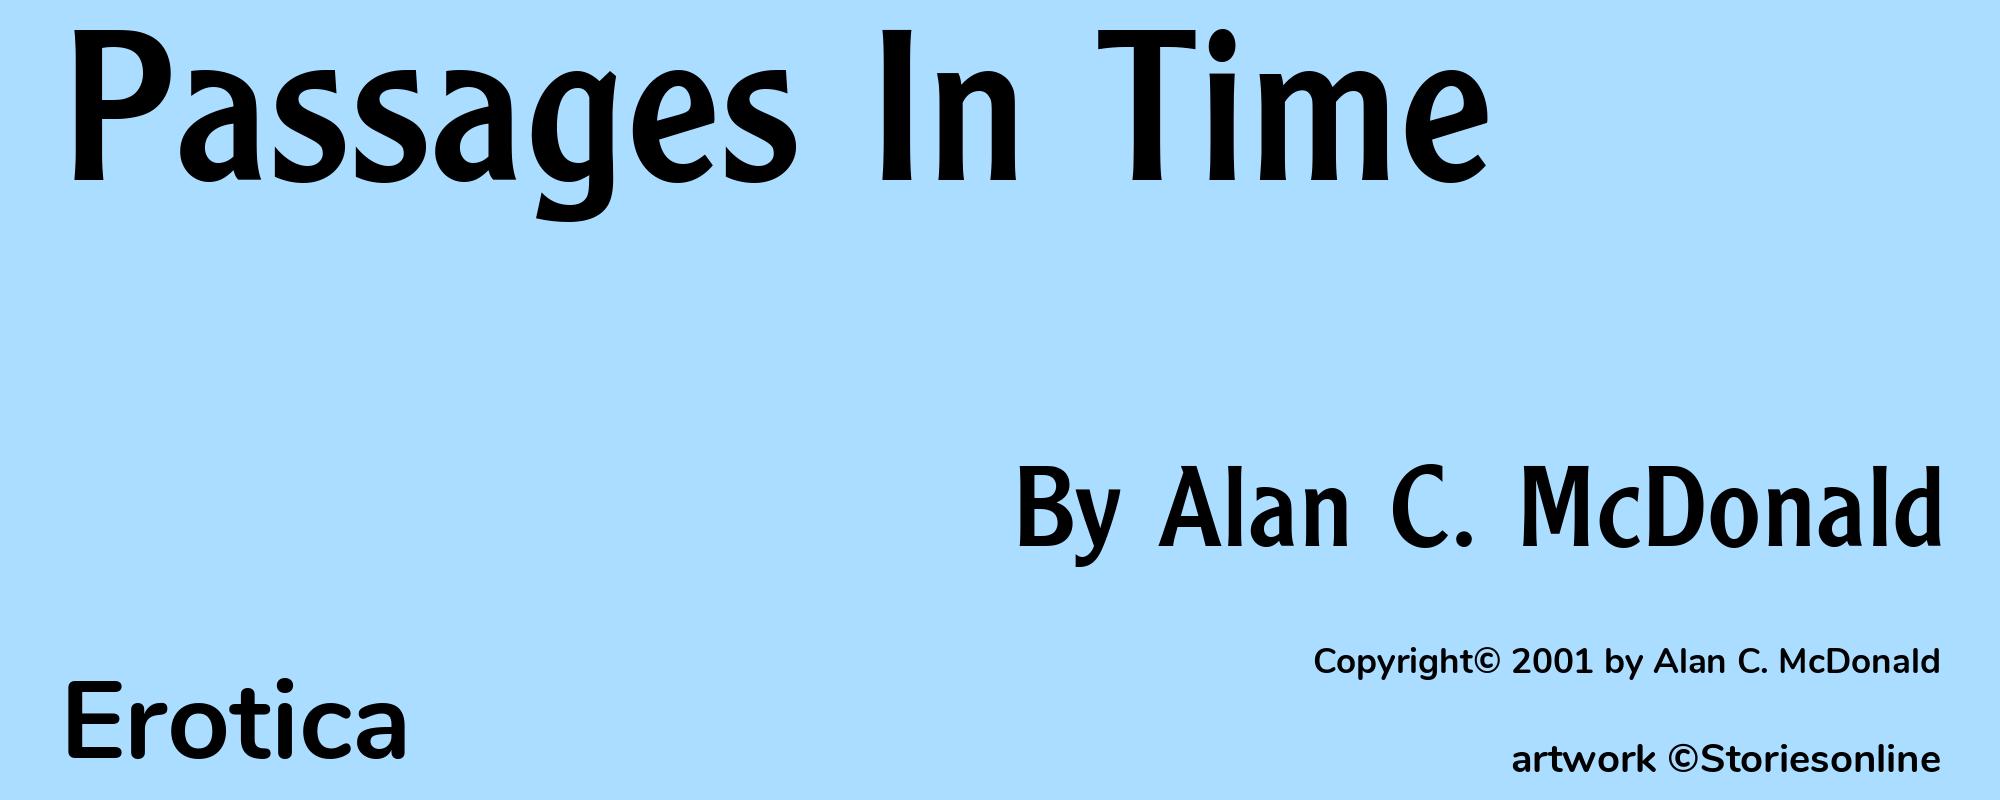 Passages In Time - Cover